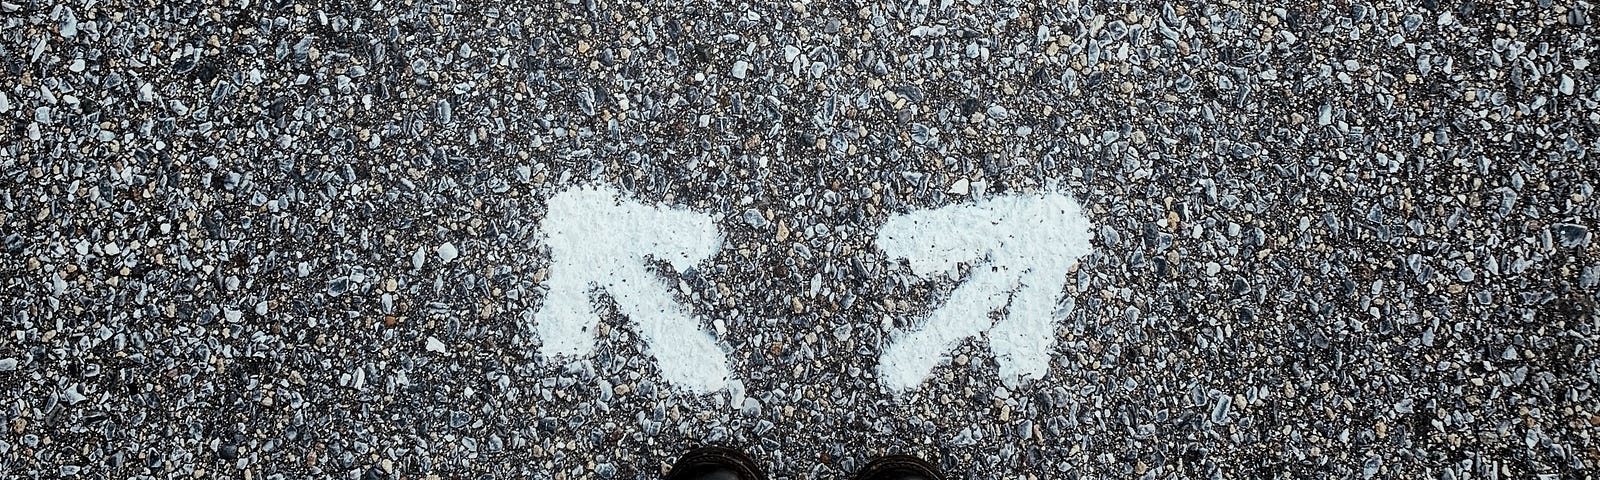 Two shoes on an empty street, each facing an arrow pointing in opposite directions